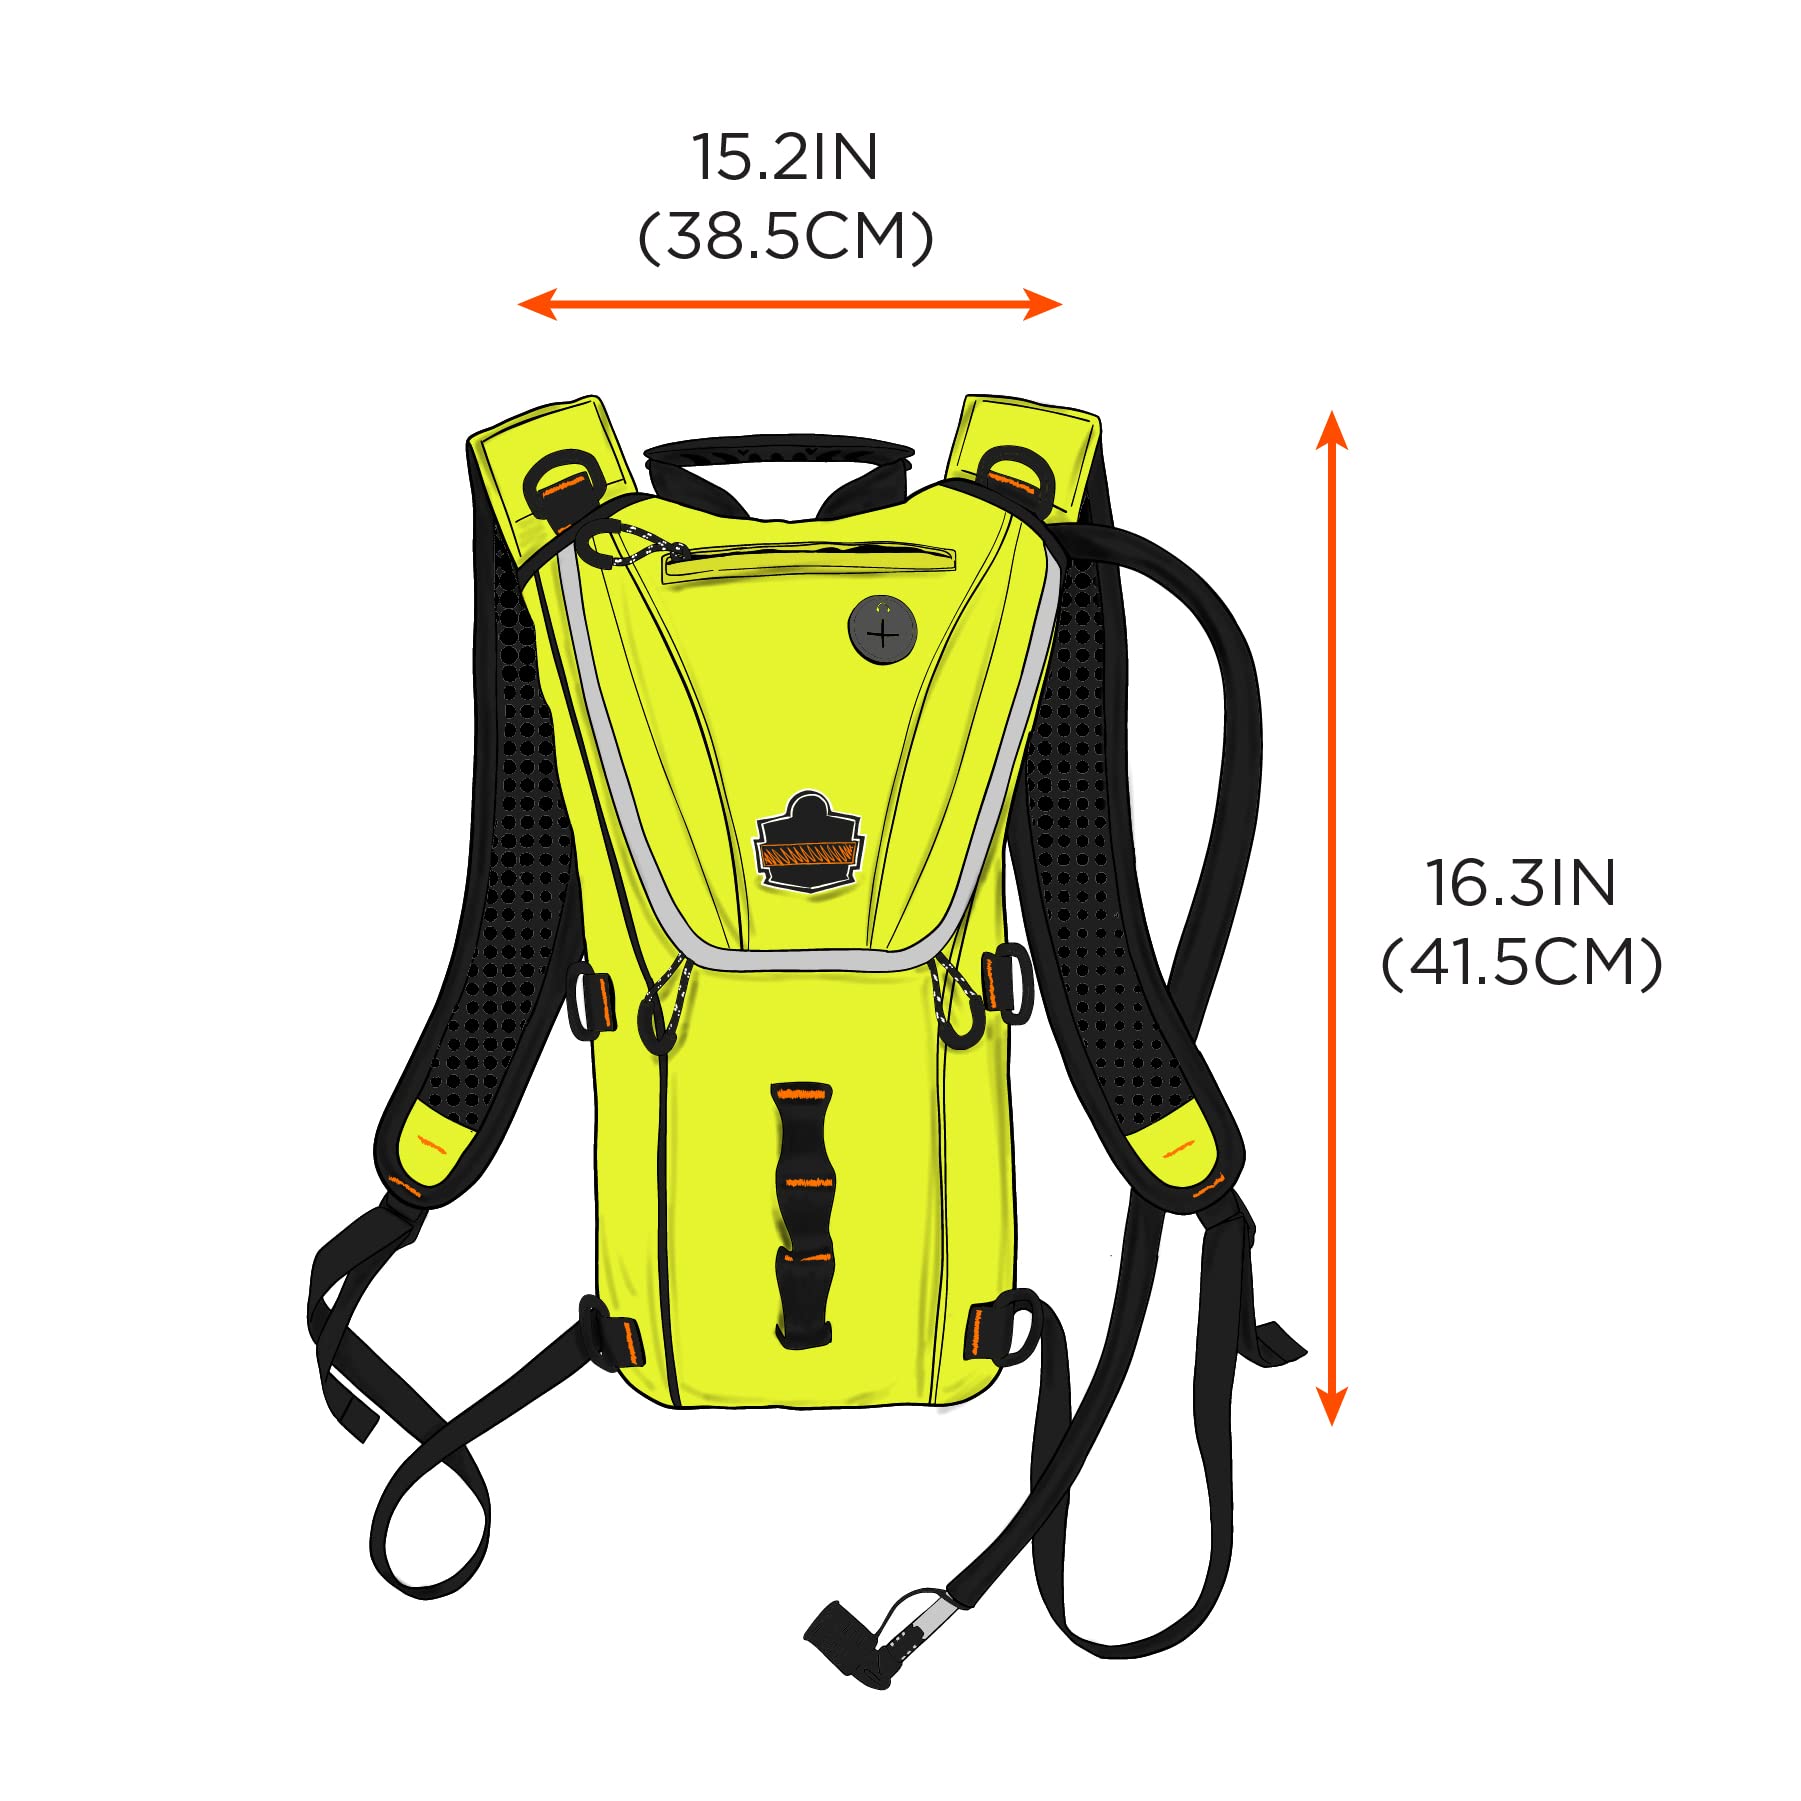 Ergodyne Chill-Its 5156 Hydration Backpack with Storage, Low Profile Pack, High Visibility Reflective, 3 Liter Bladder, Breakaway Shoulder Straps,Lime